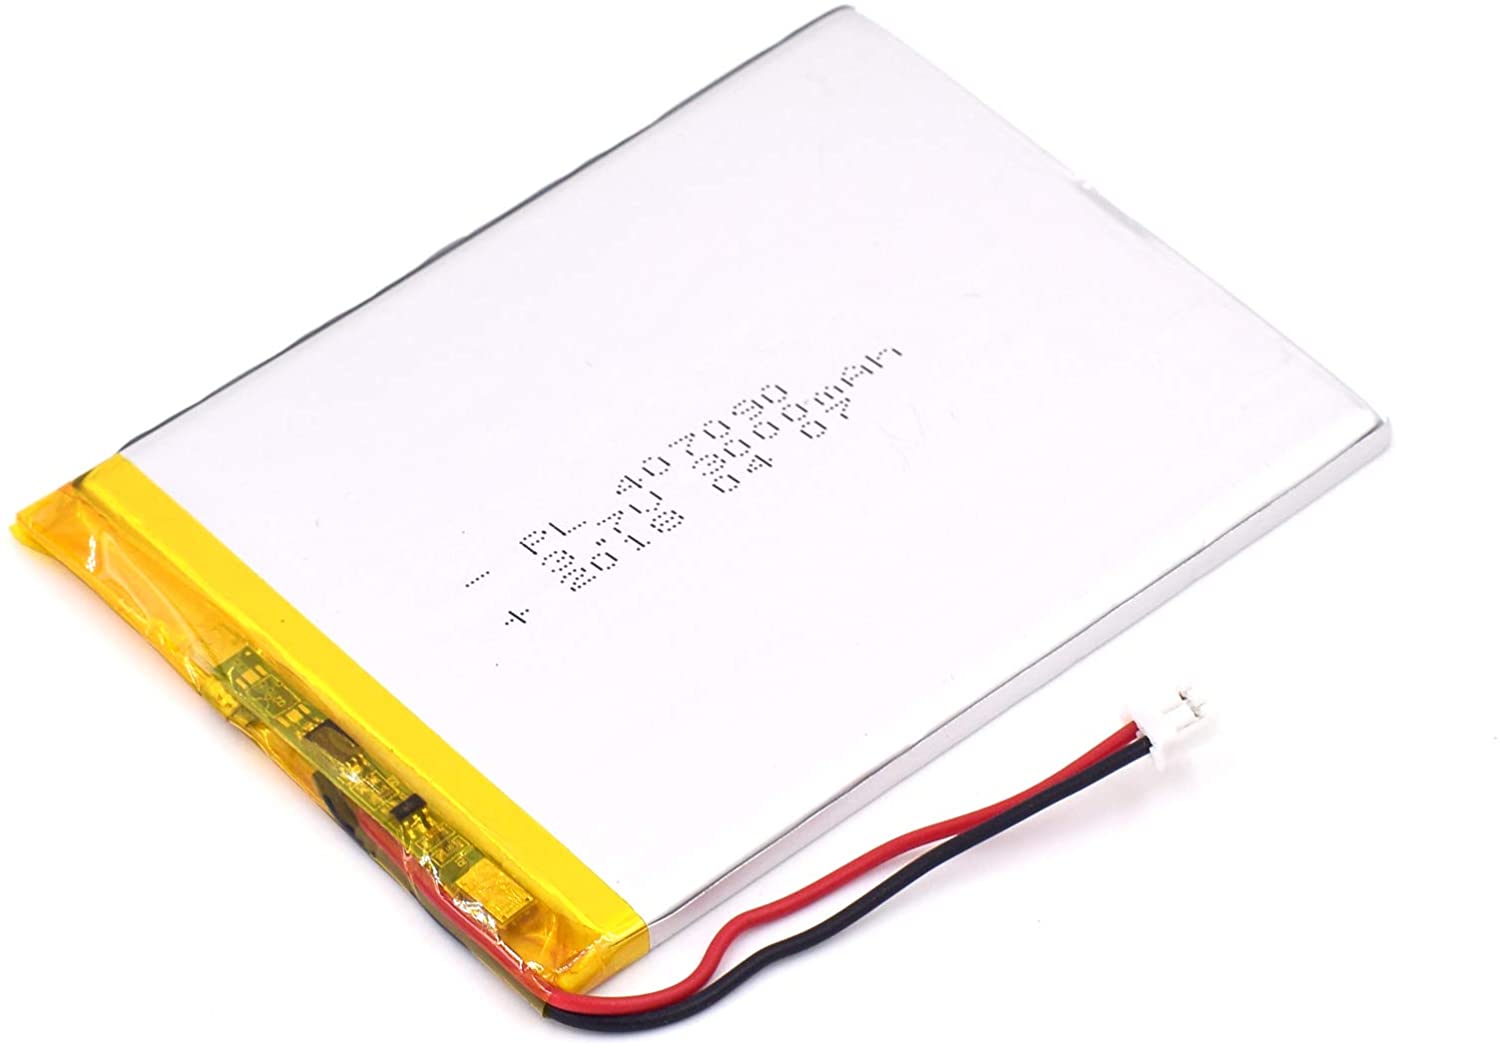 YDL 3.7V 3000mAh 407090 Rechargeable Lithium Polymer Battery Length 92mm